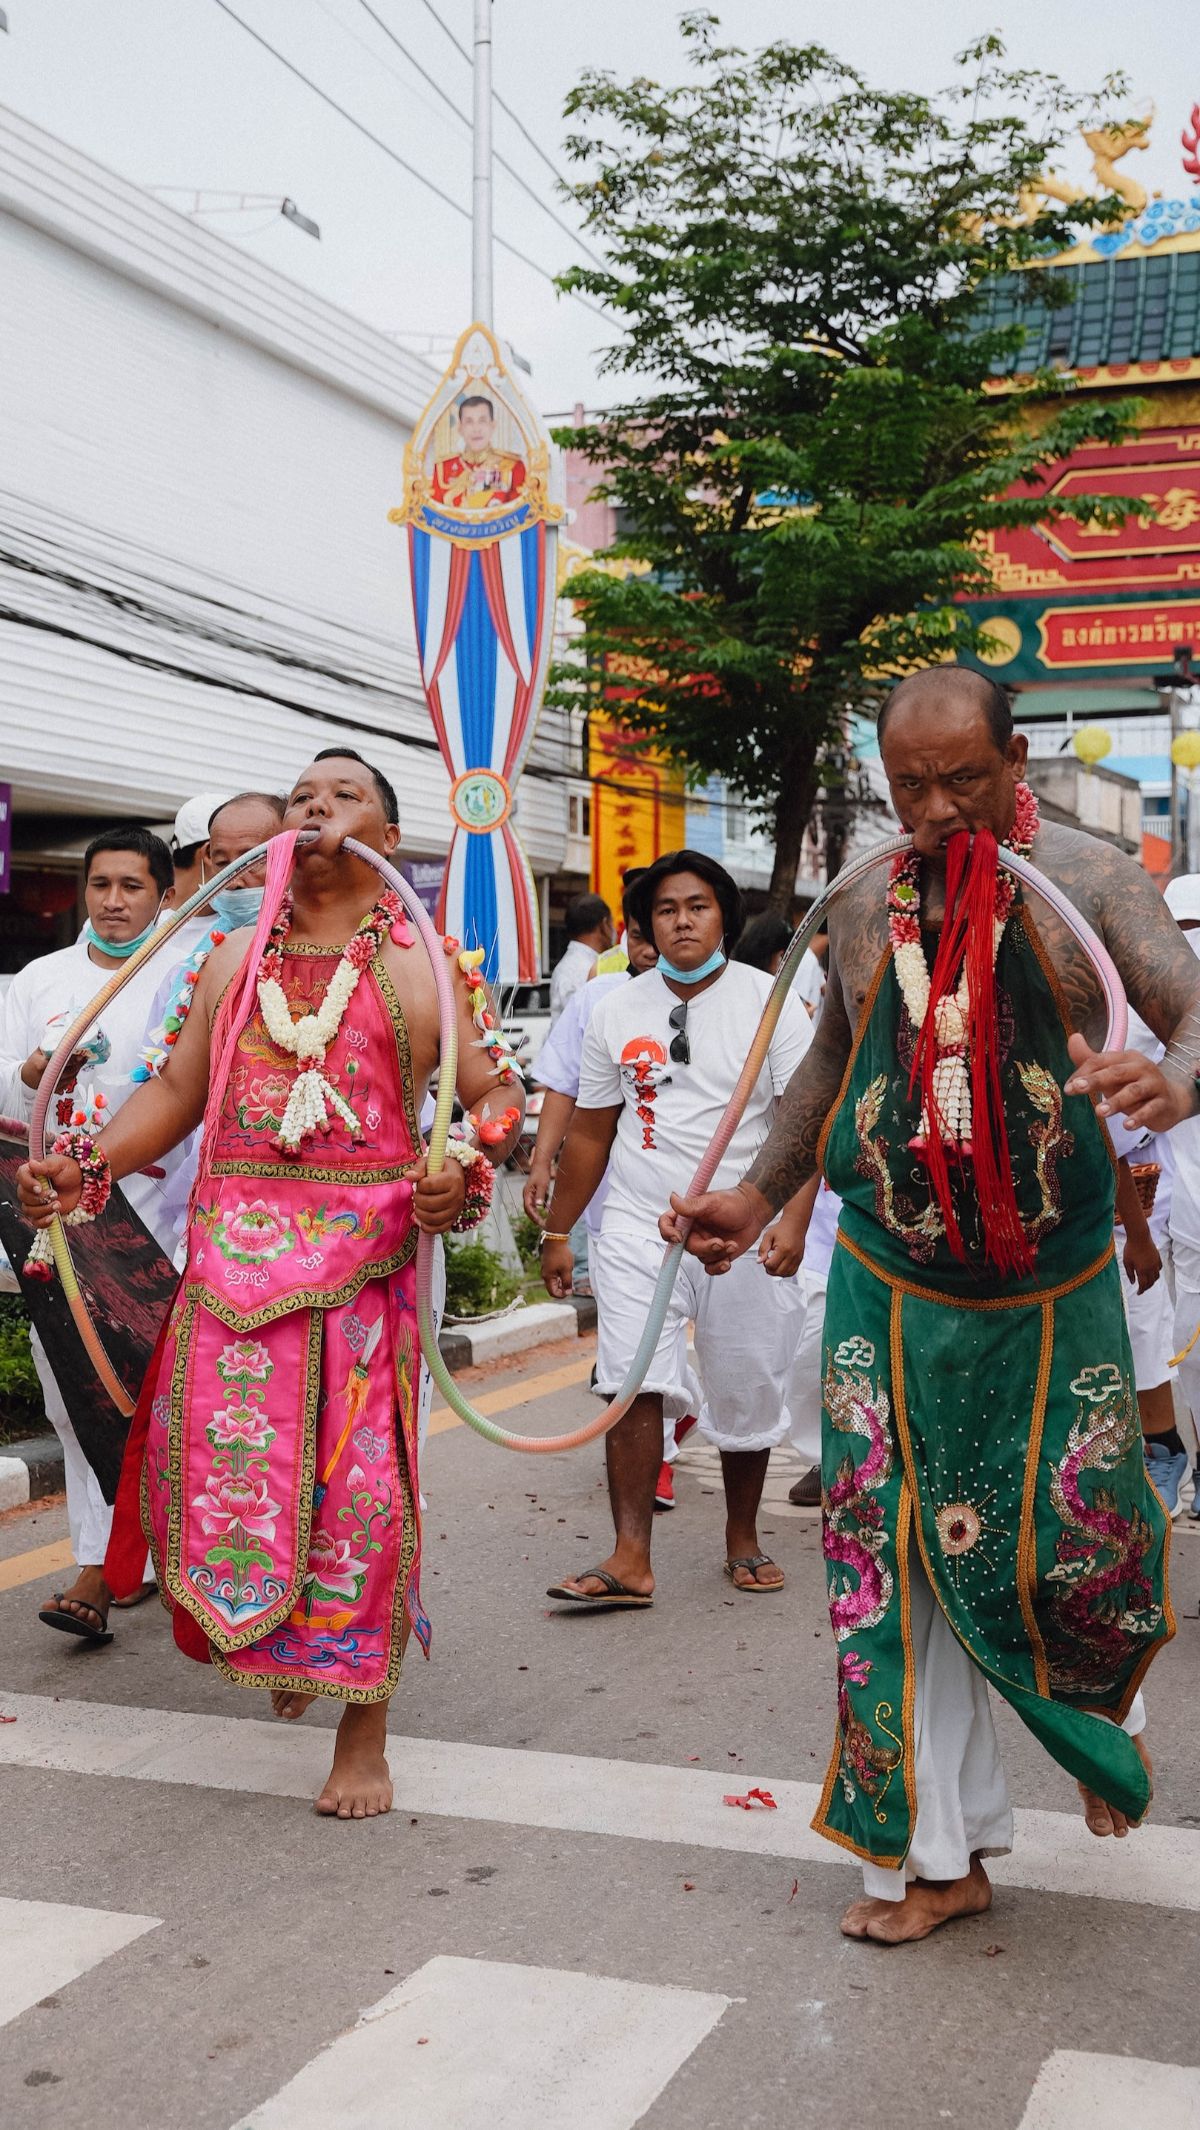 3. Phuket Vegetarian Festival: A Display of Culture and Devotion<br>